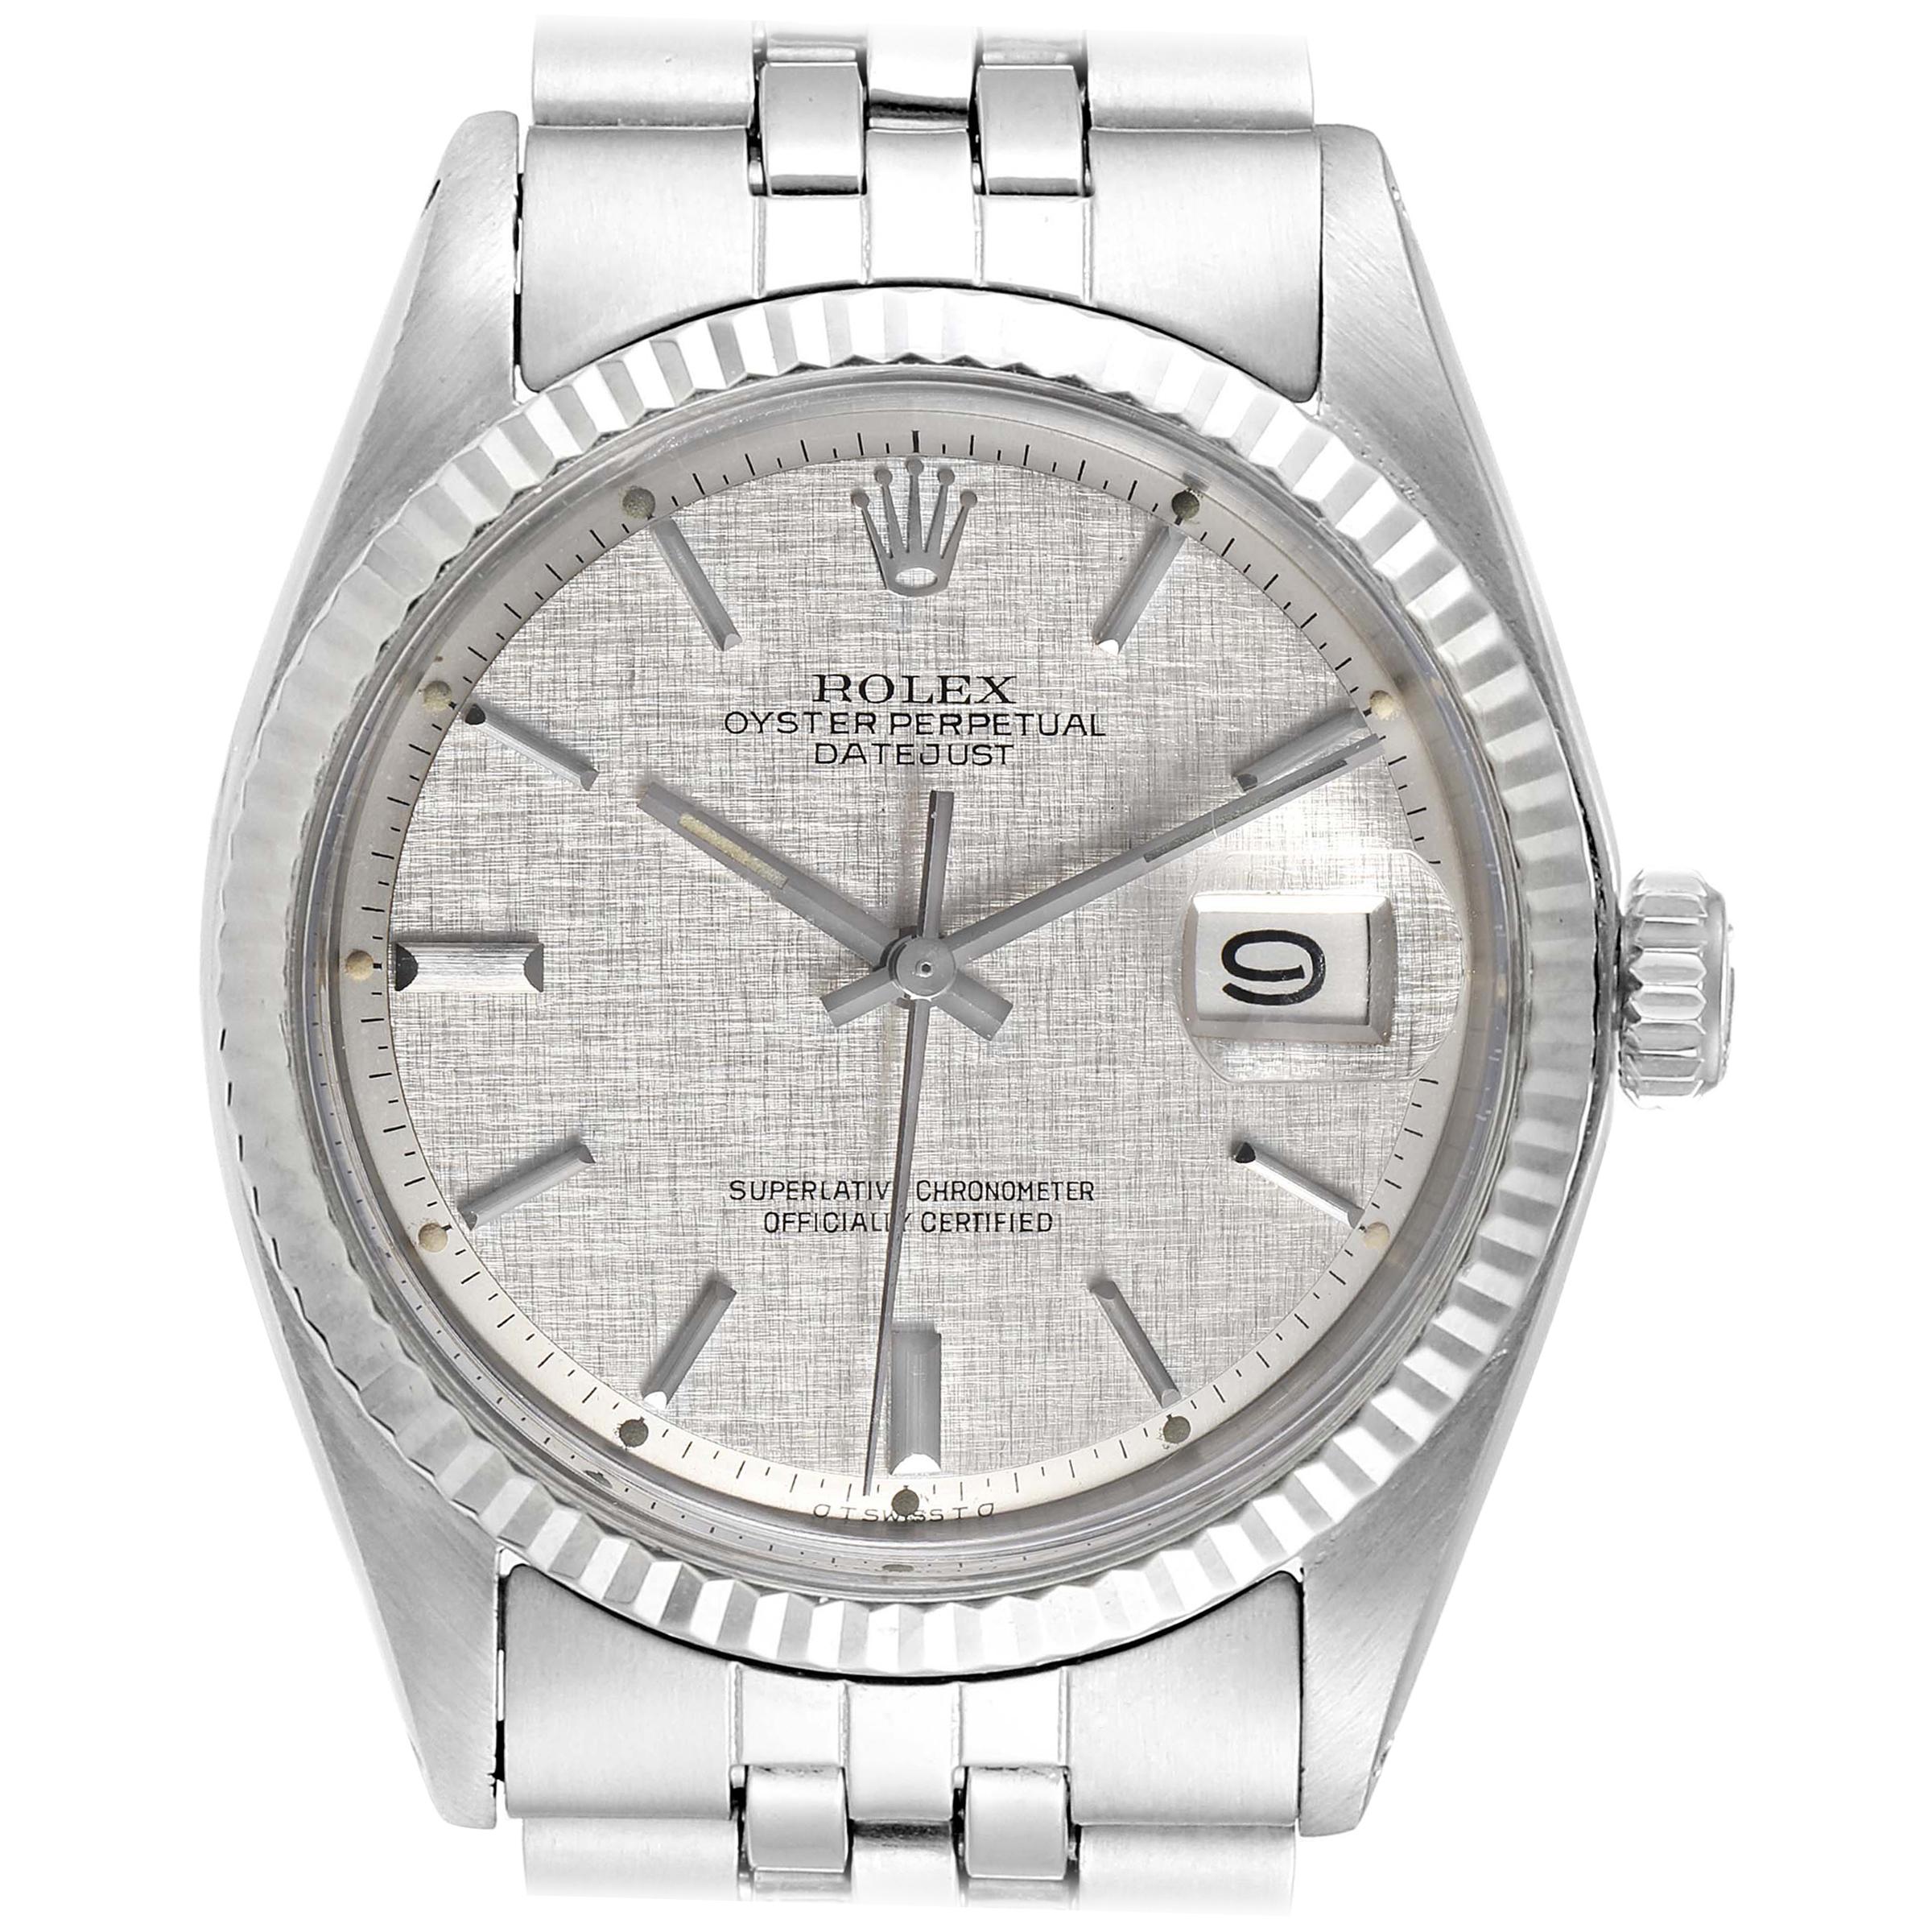 Rolex Datejust Steel White Gold Linen Dial Vintage Watch 1601 Box Papers For Sale